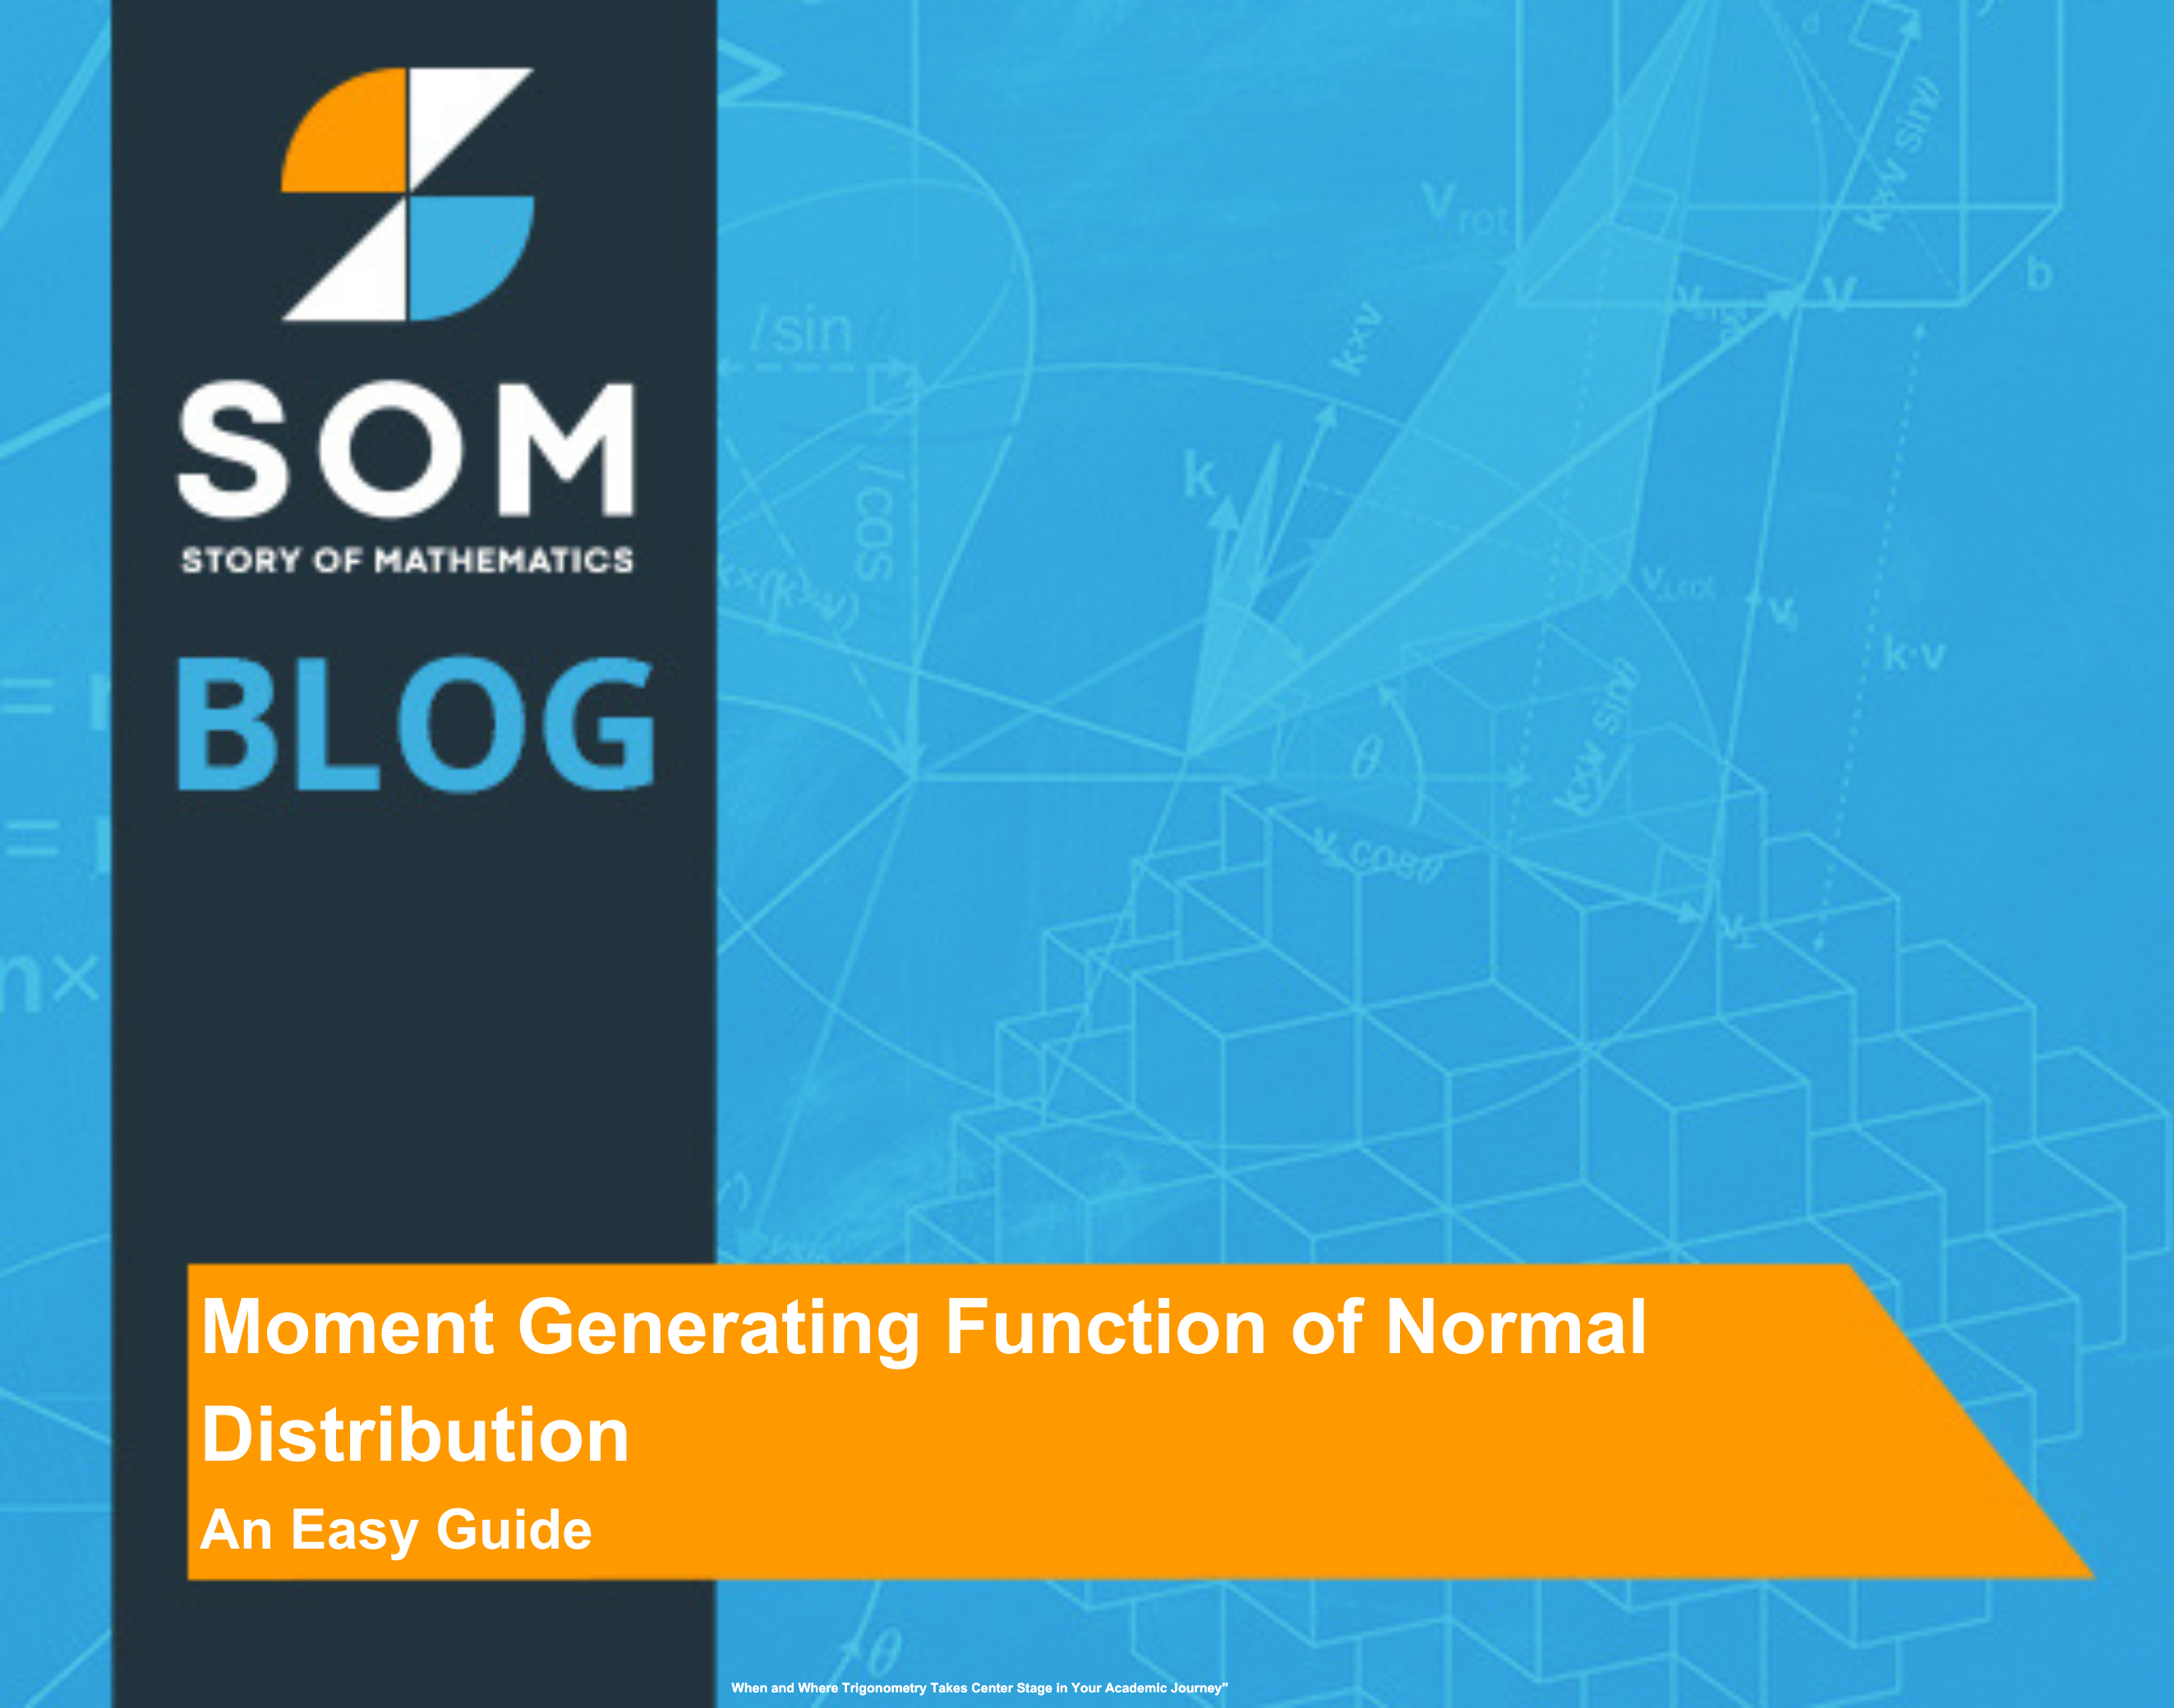 Feature Image Moment Generating Function of Normal Distribution An Easy Guide